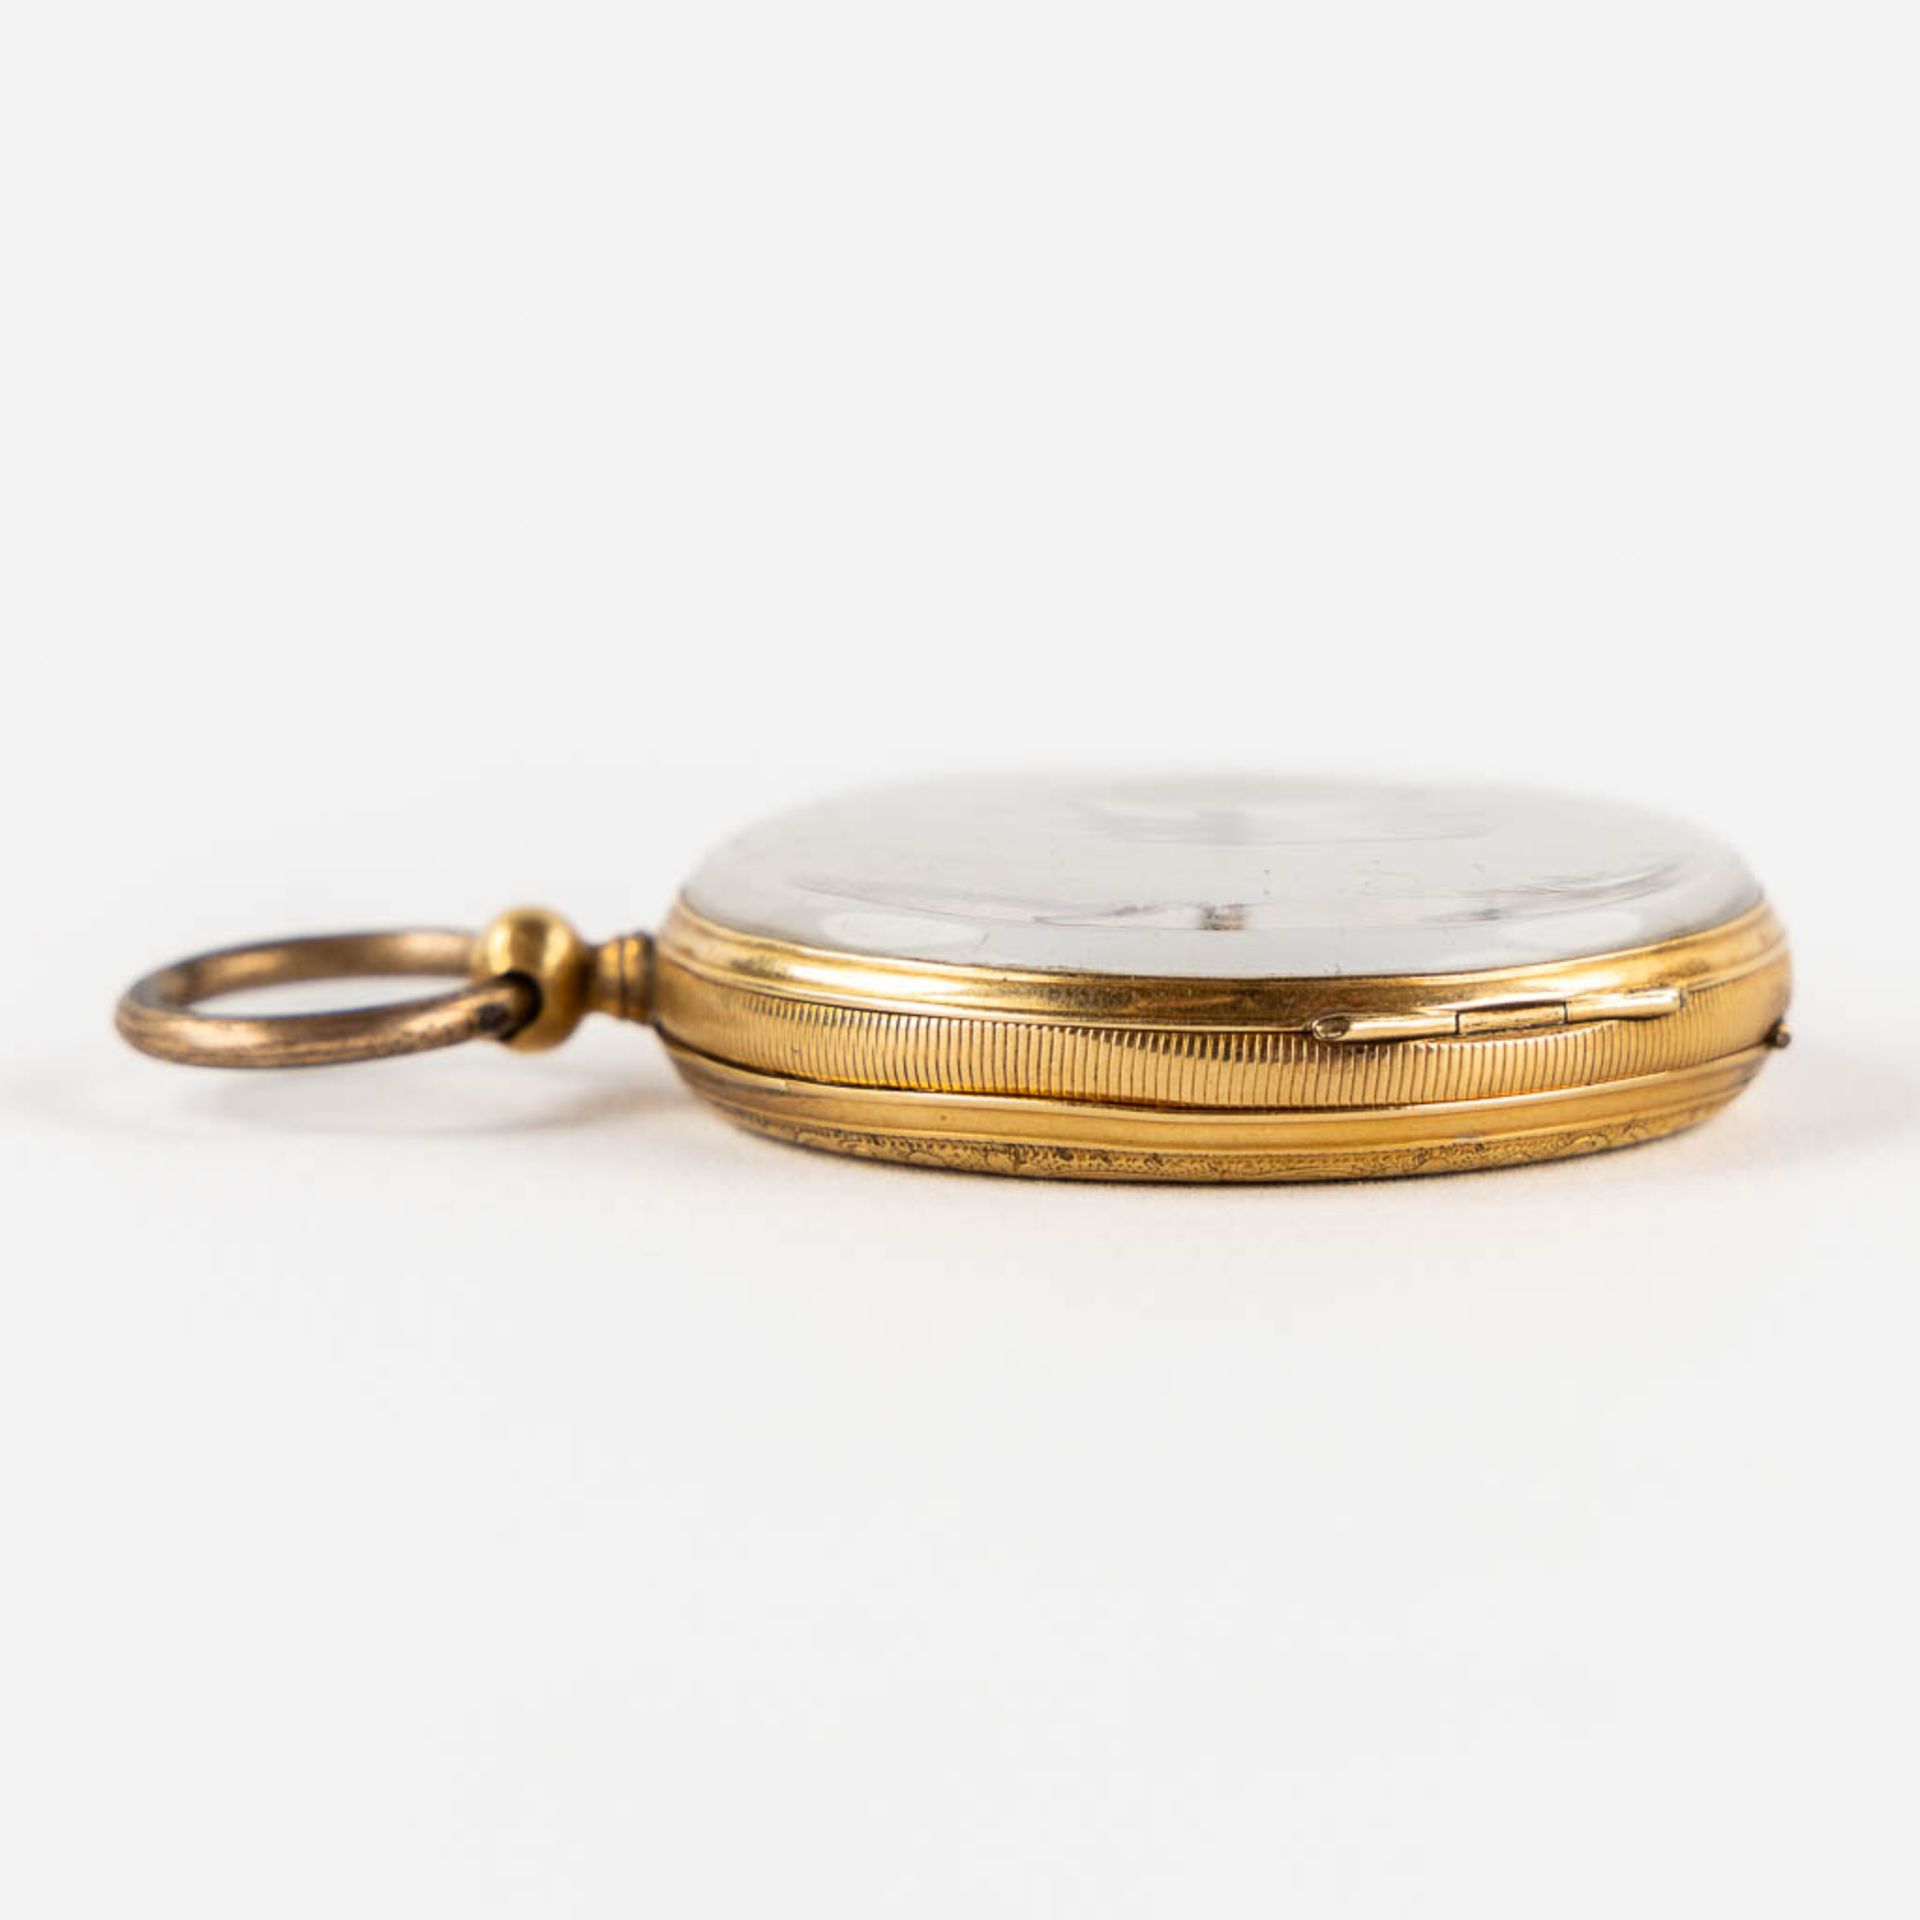 An antique pocket watch, 18kt yellow gold. Guioche image of a running horse. (W:4,3 x H:6,3 cm) - Image 7 of 15